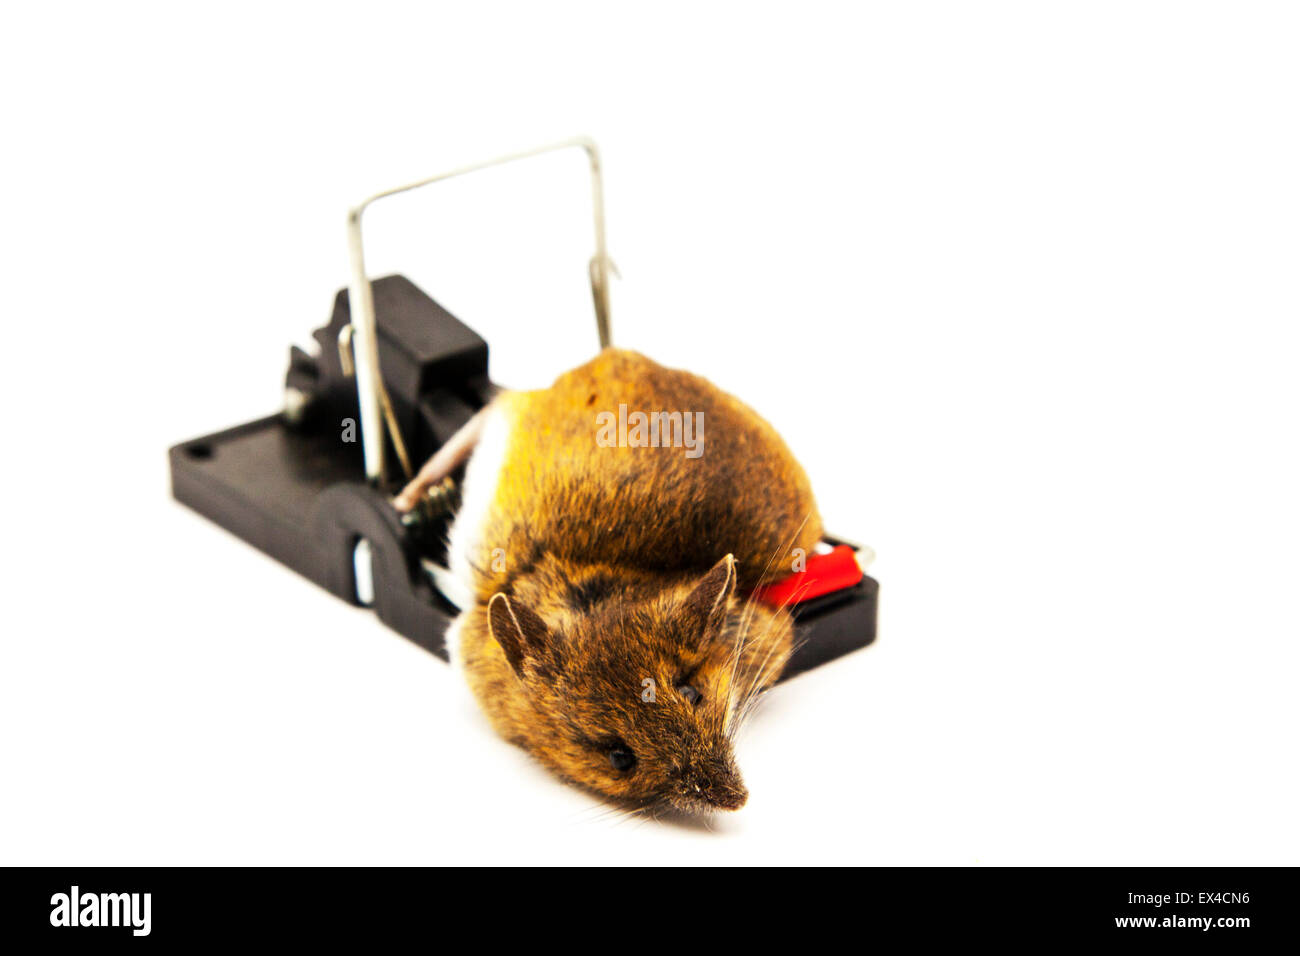 Mouse caught in mousetrap dead mice trapped killed snapped neck copy space copyspace white background Stock Photo